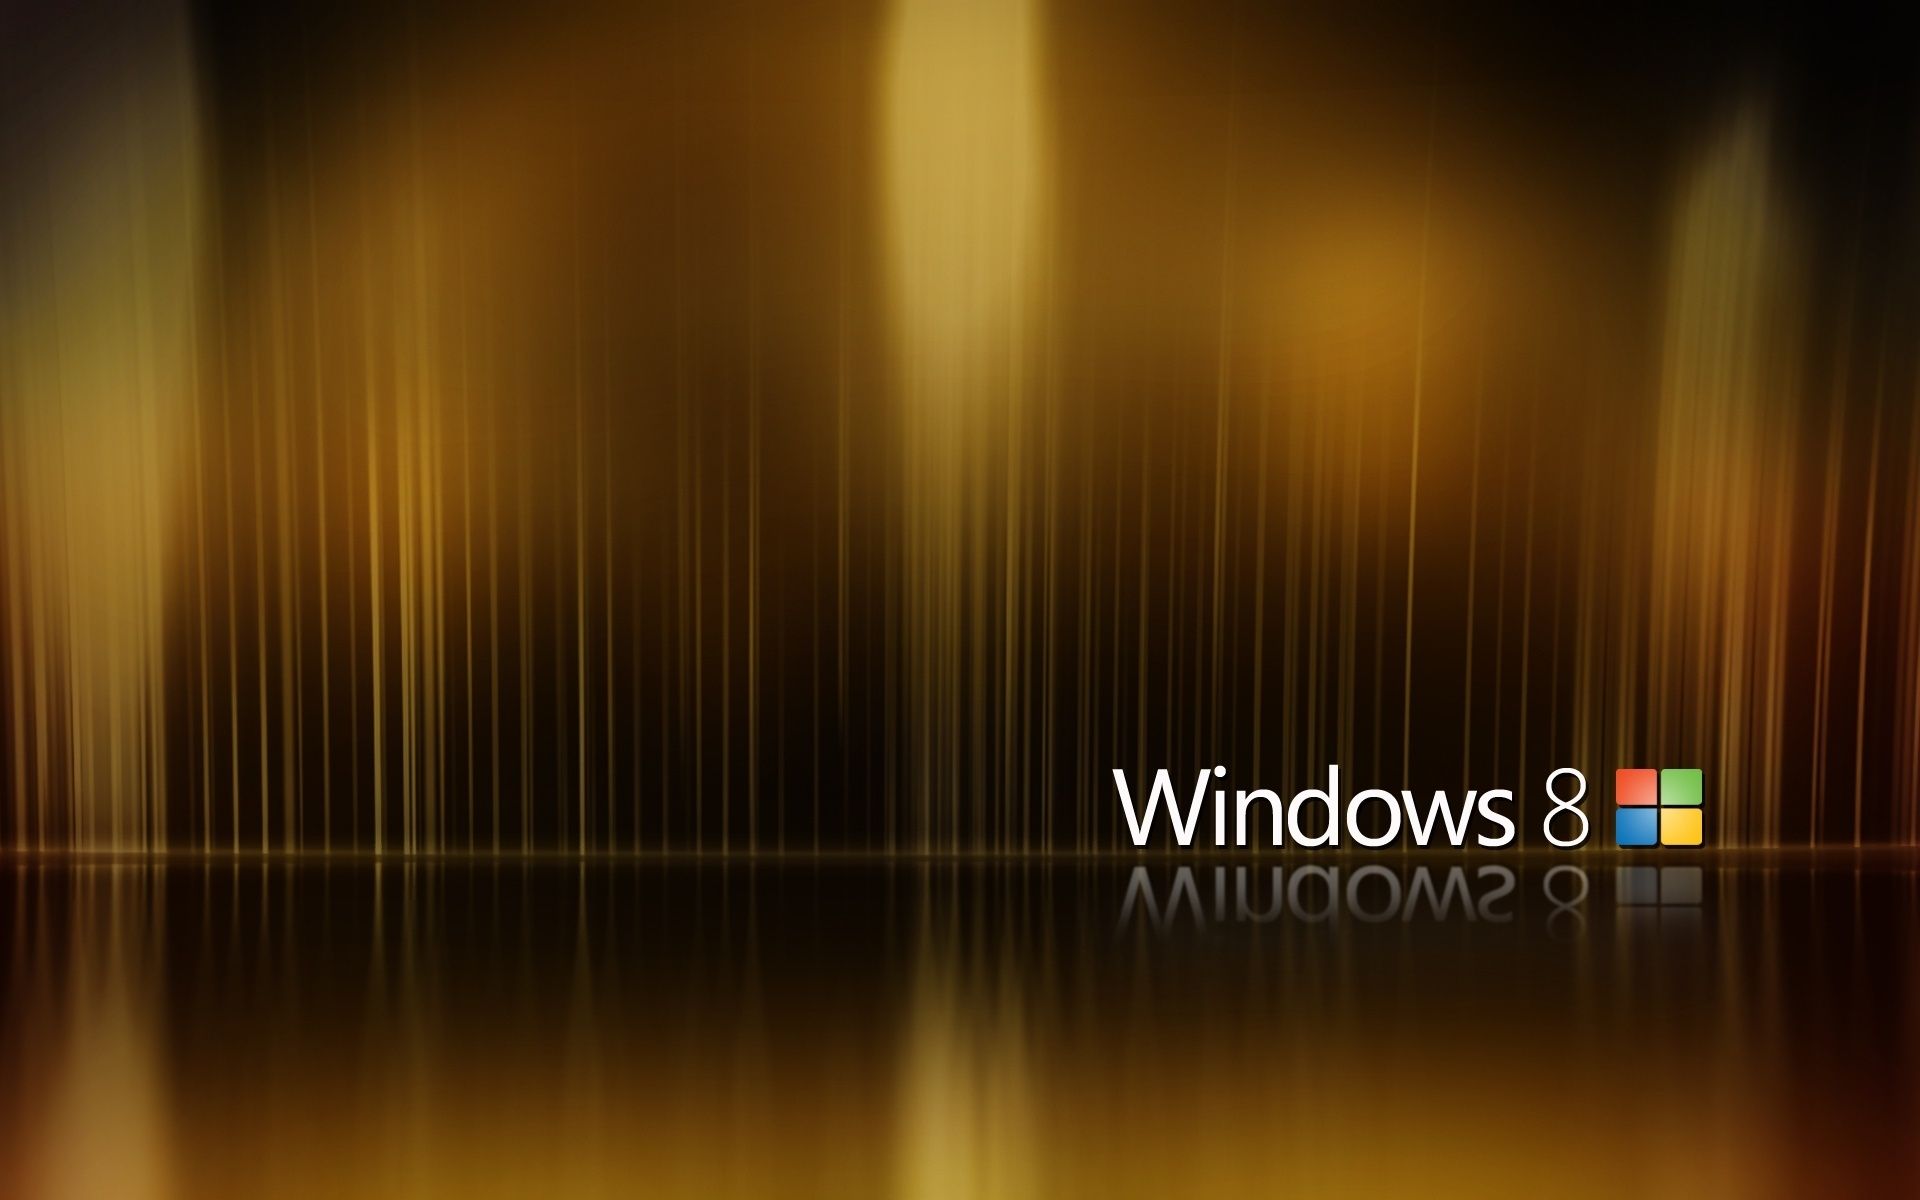 Wallpaper Windows 8 Brown Abstract Background Ultra HD Wallpaper For Laptop